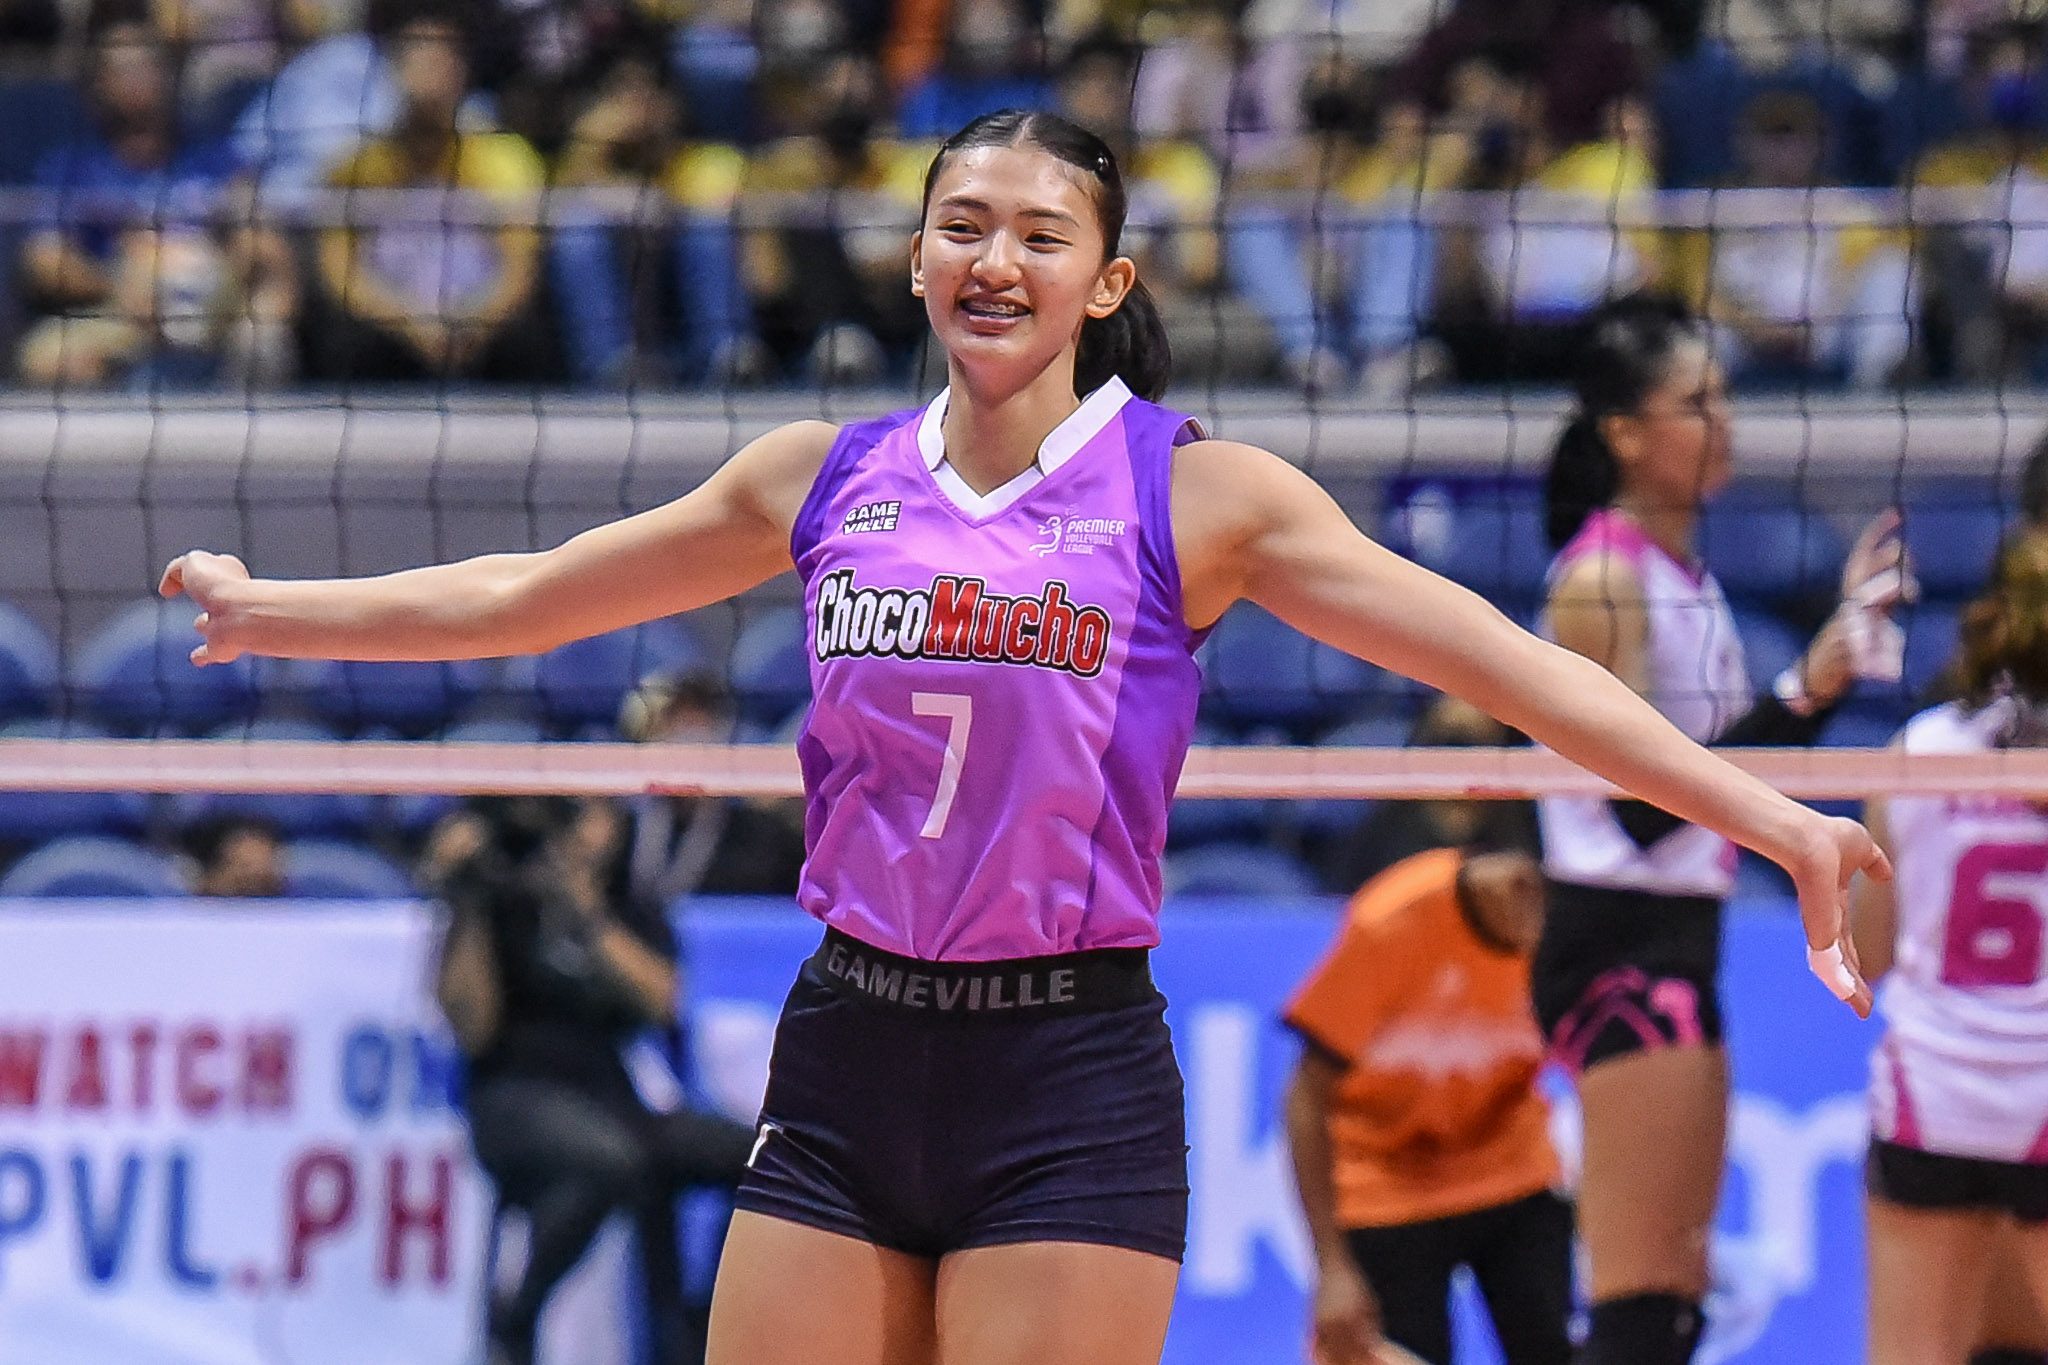 Choco Mucho’s Maddie Madayag hungry for more after best game since ACL tear